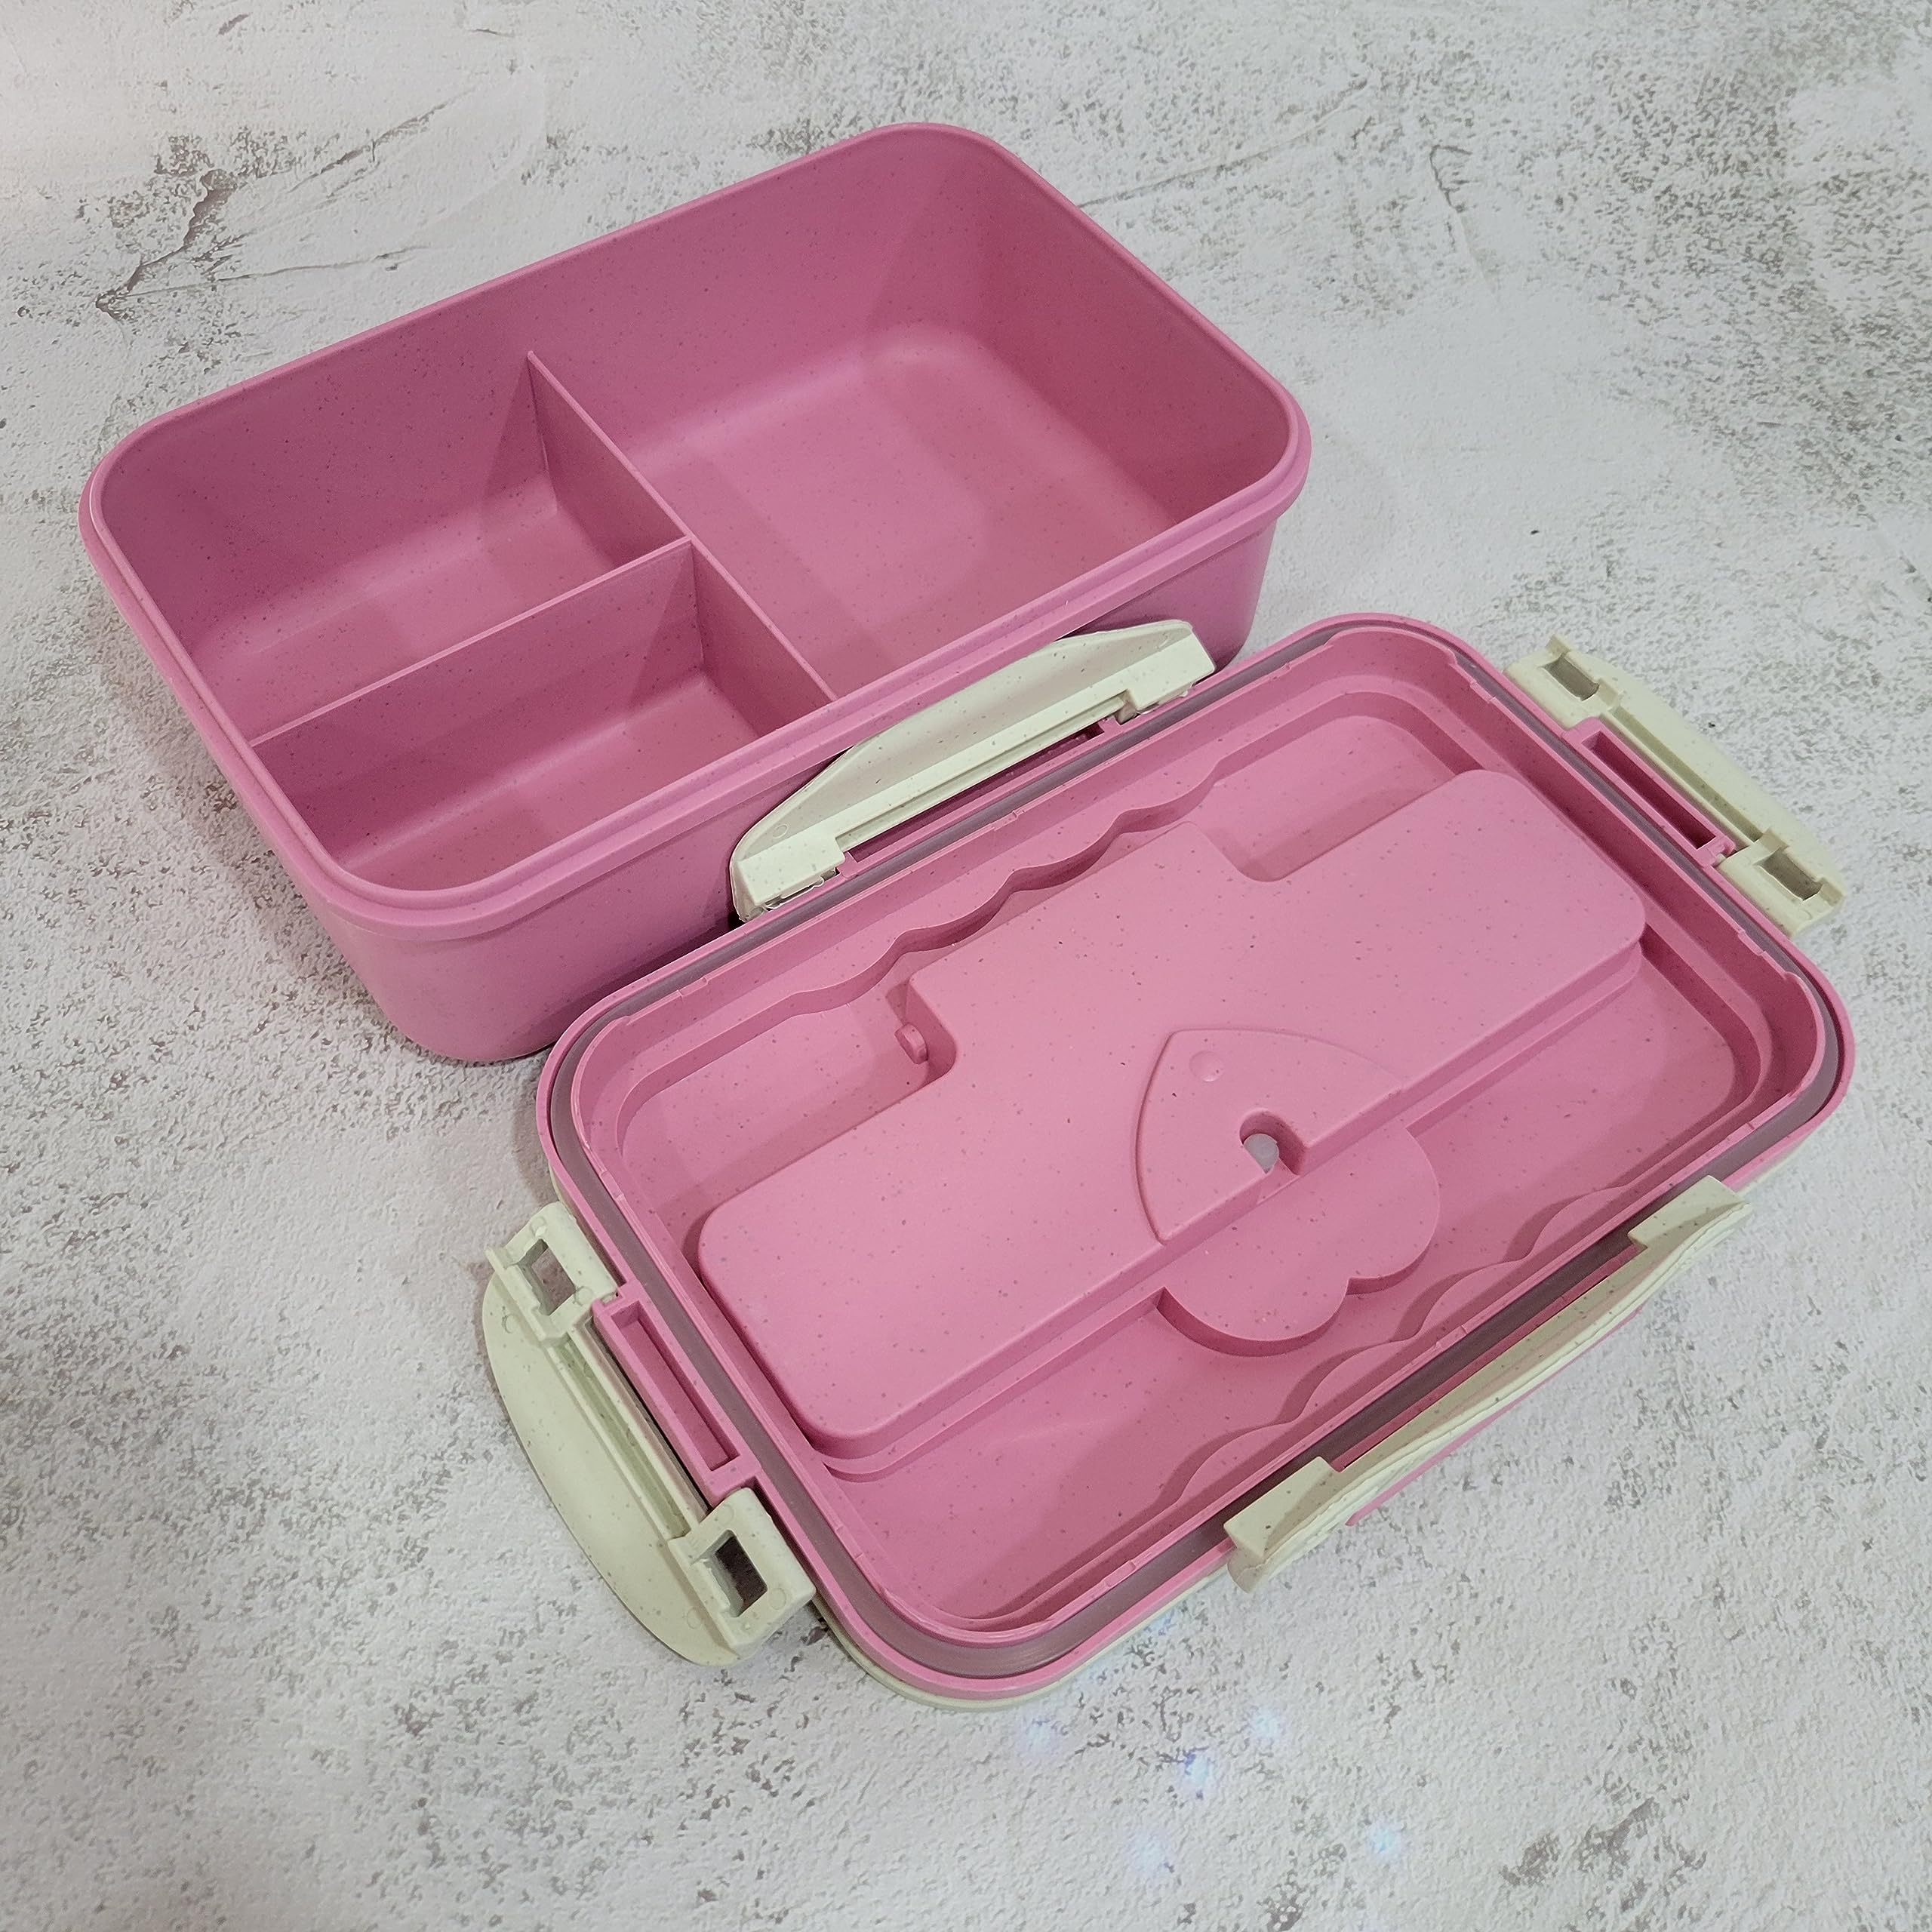 AEMUYA Lunchboxes The perfect bento lunch box for your healthy meals